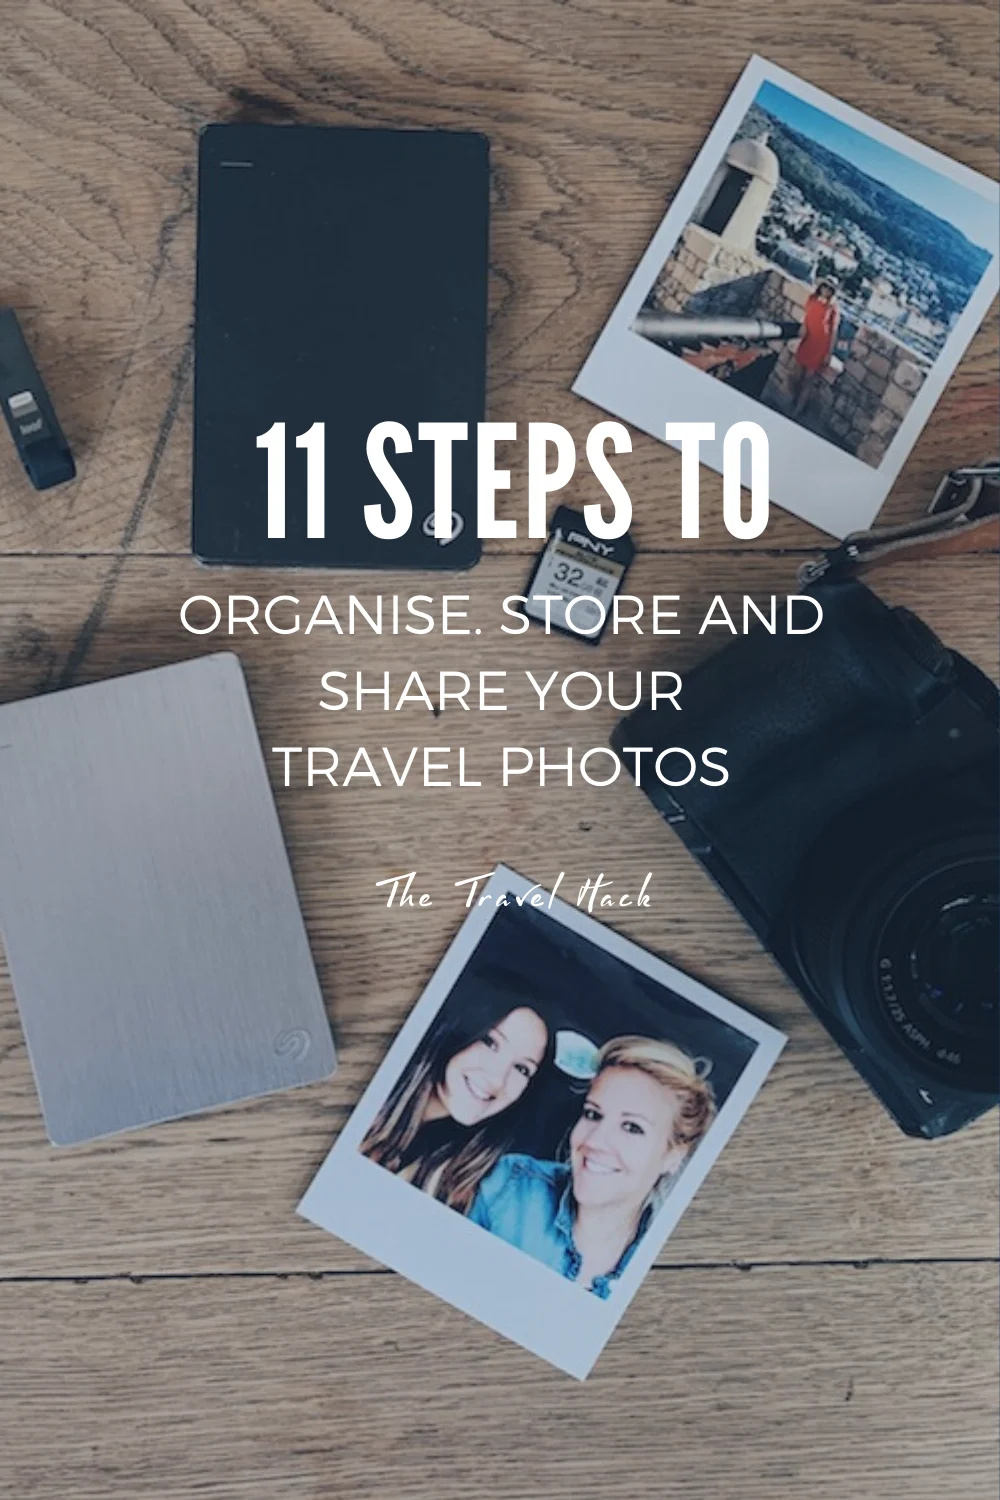 11 steps to help you organise, store and share your travel photos